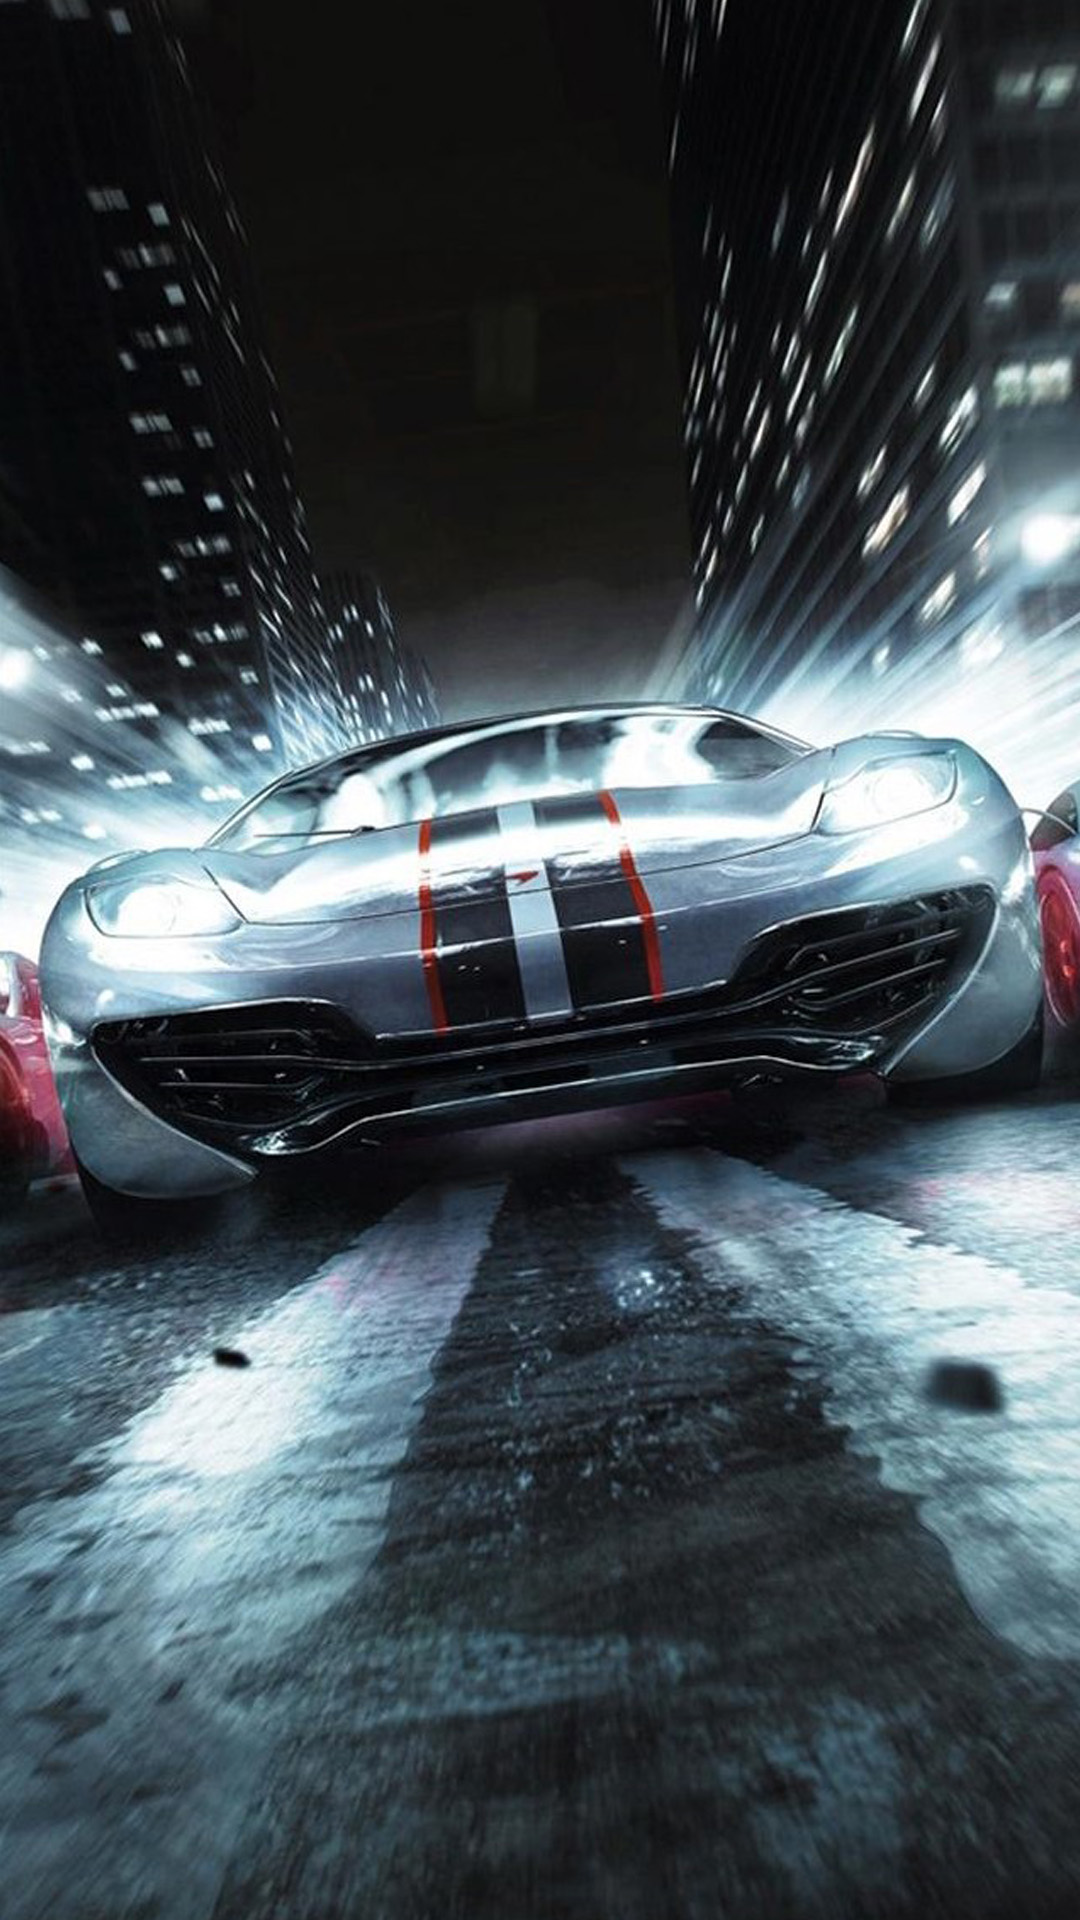 games hd wallpapers for android,vehicle,car,supercar,automotive design,performance car